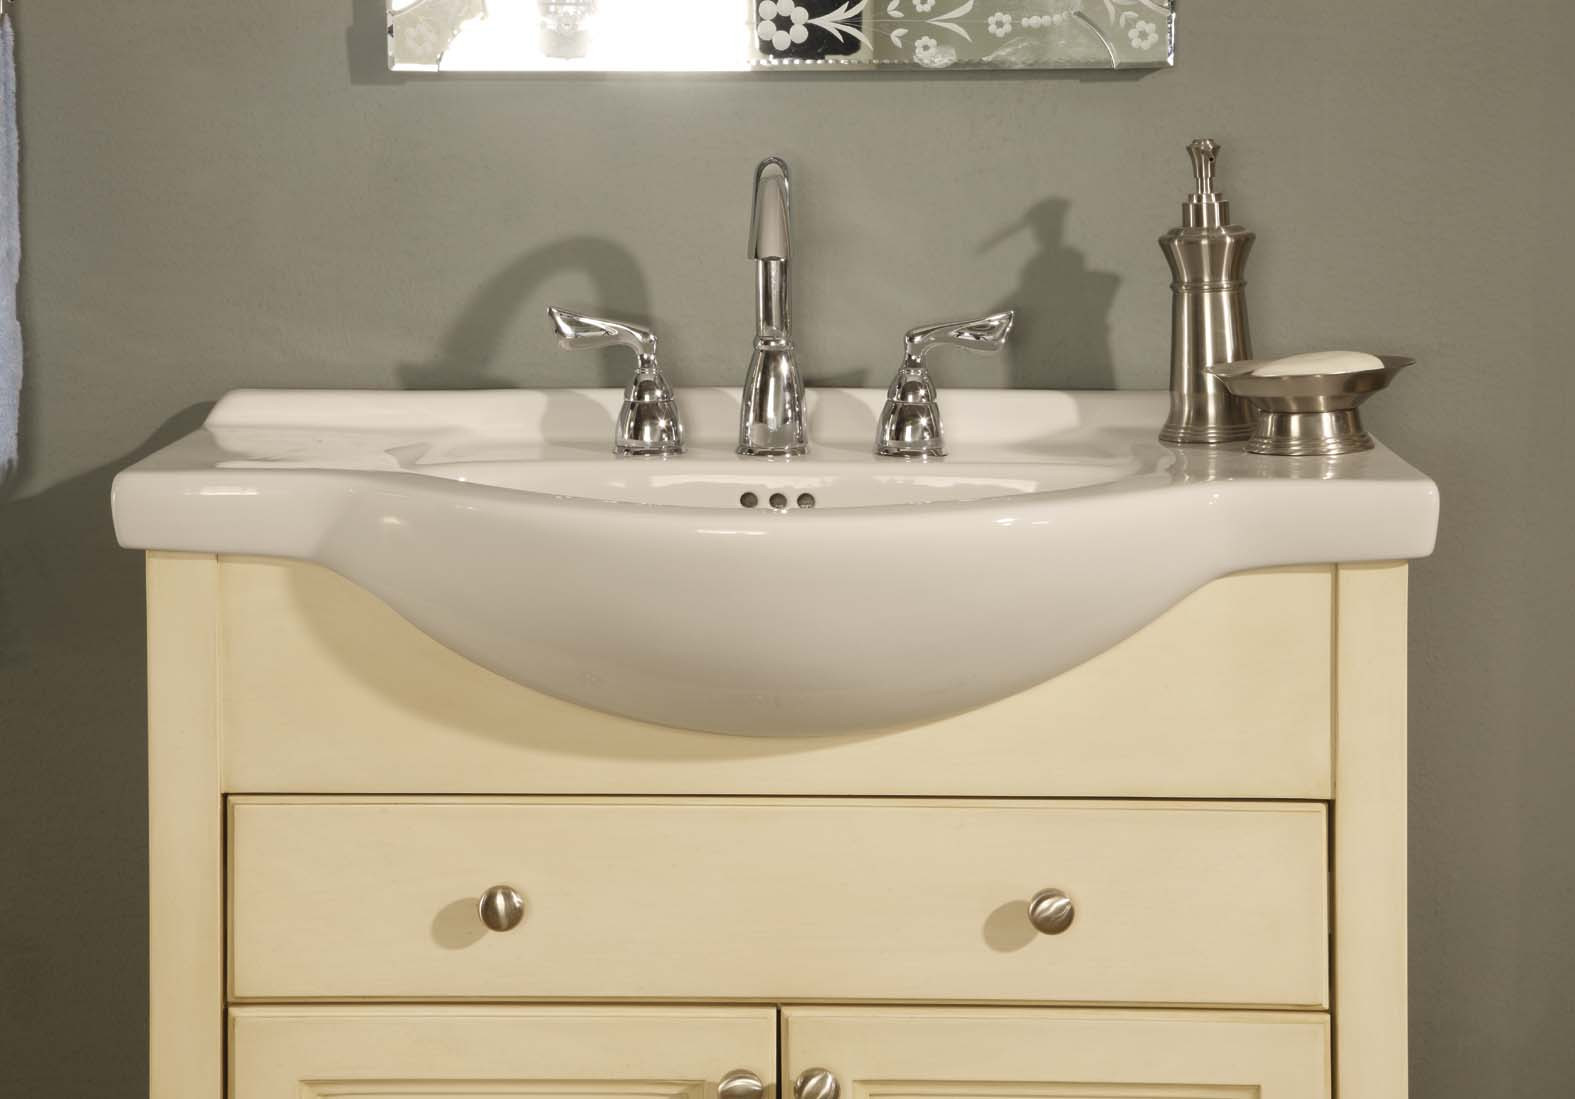 Shallow Bathroom Cabinet
 Empire Industries WINDSOR 34" Shallow Depth Vanity with